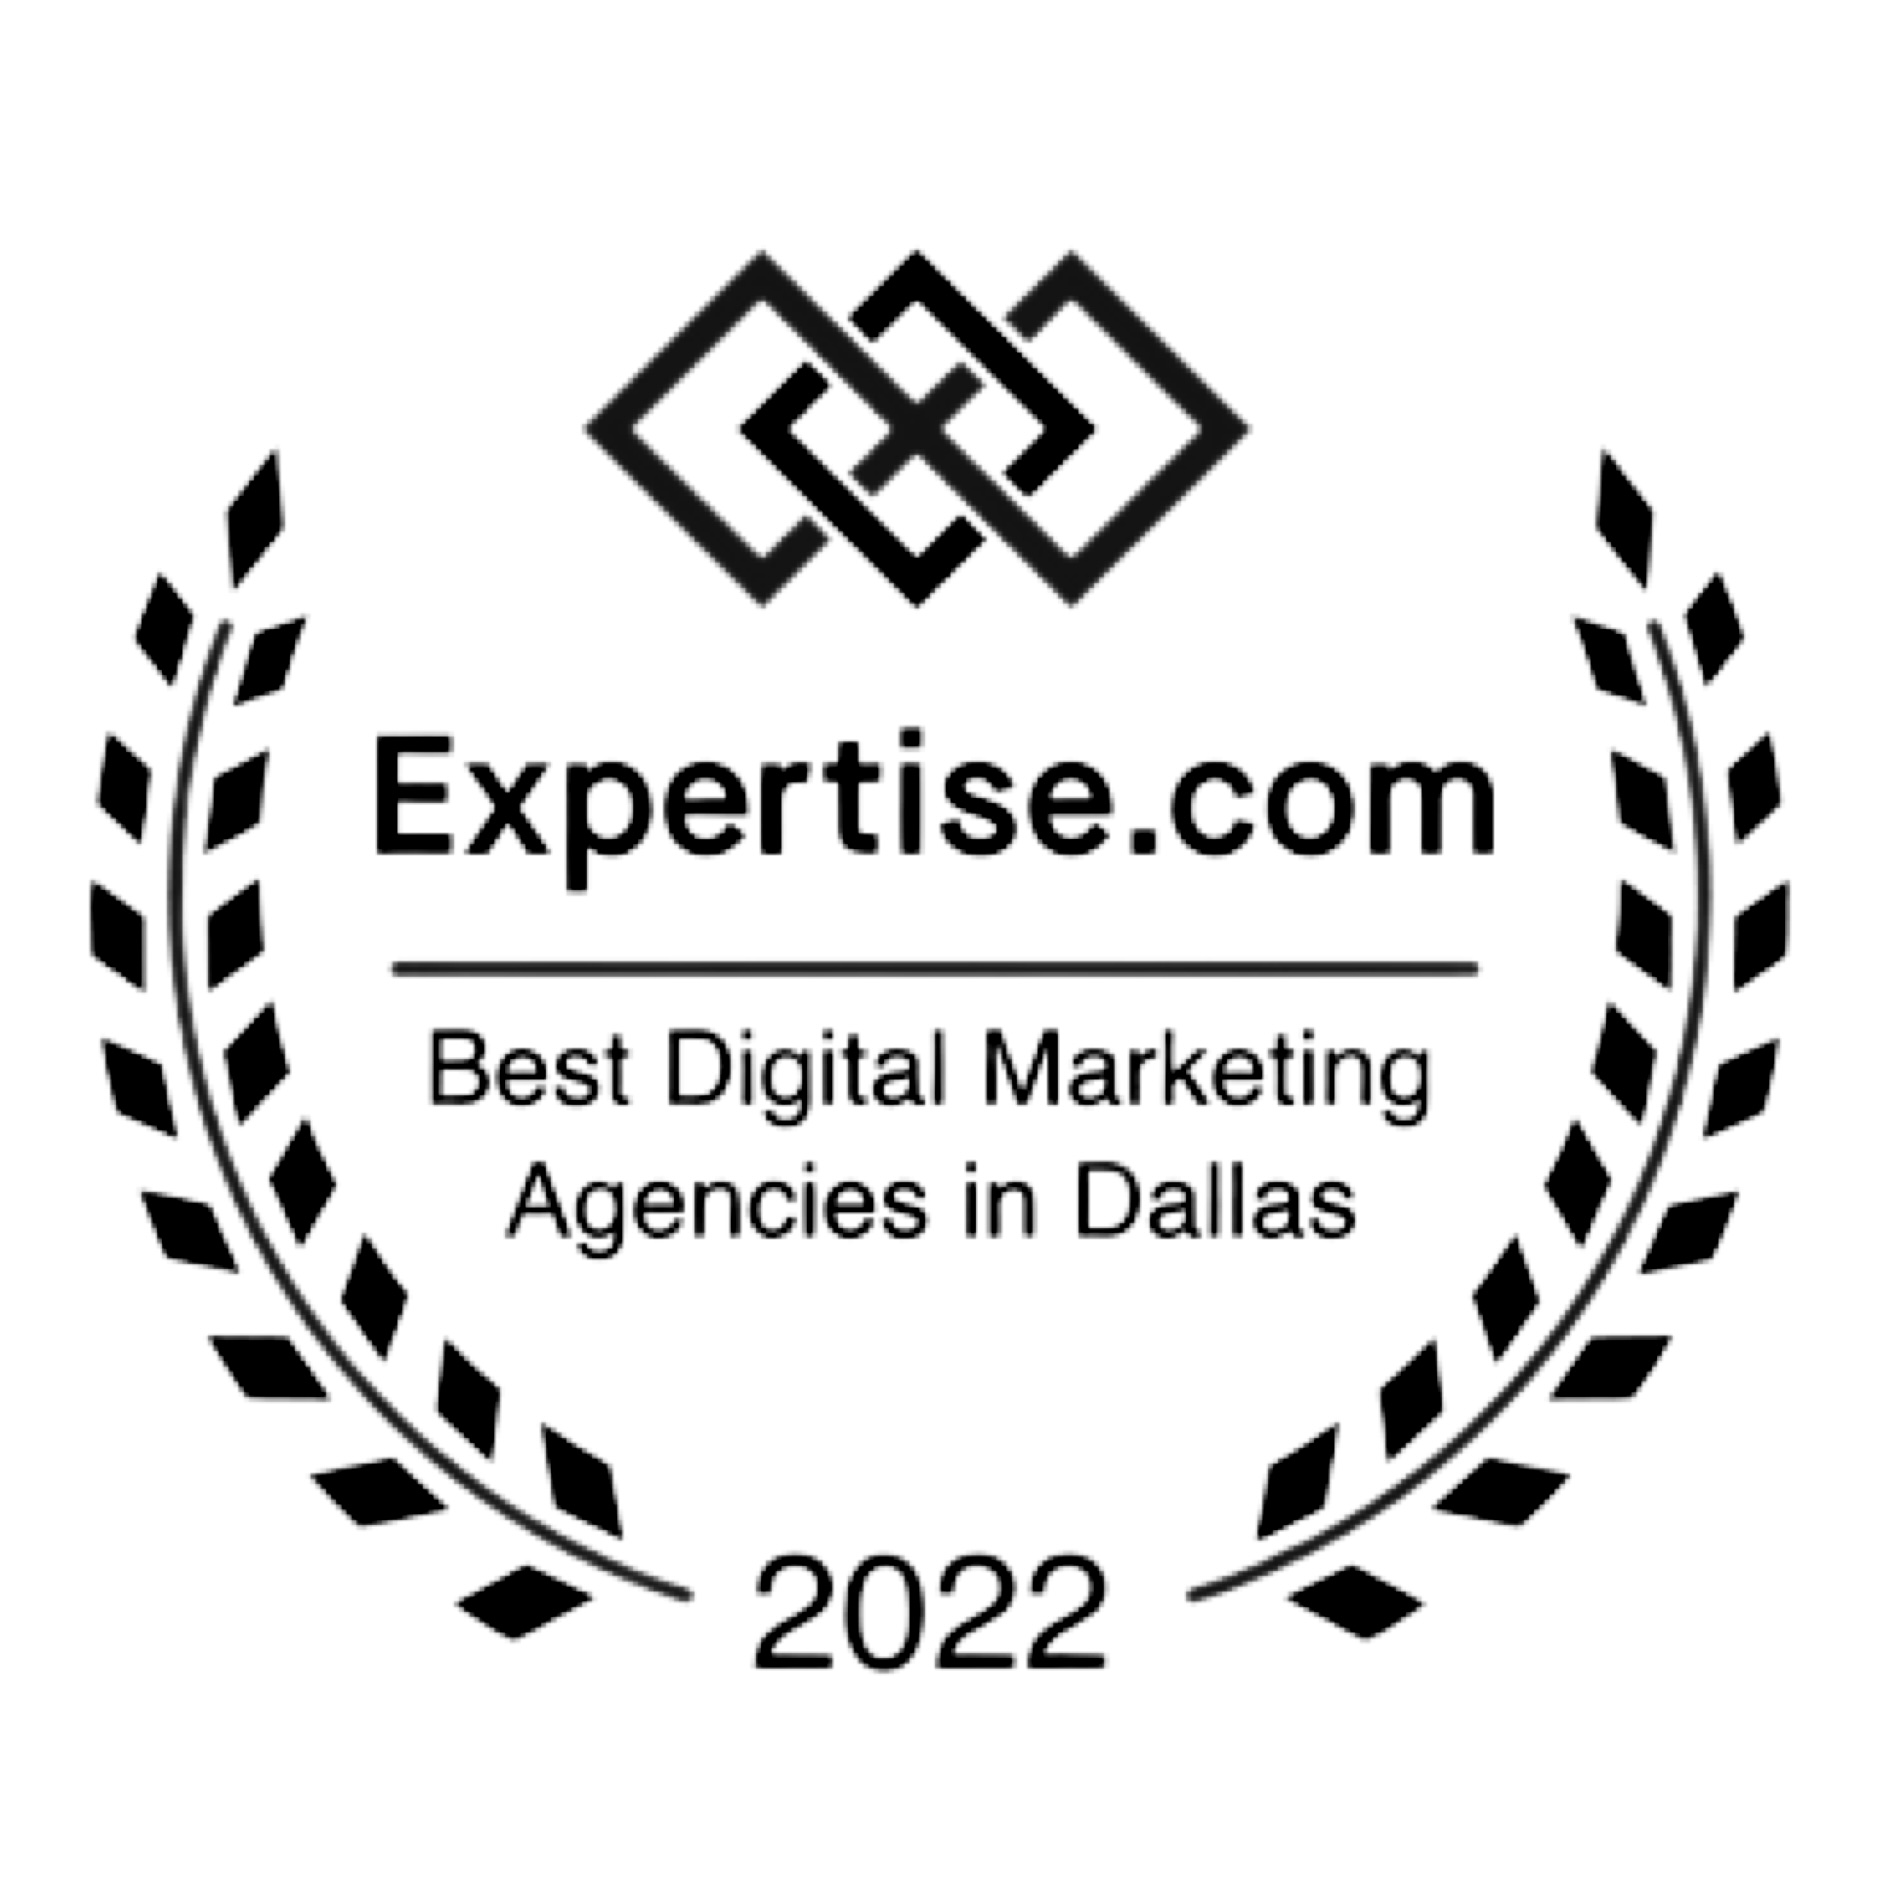 United StatesのエージェンシーAltered State ProductionsはBest Digital Marketing Agencies in Dallas - Expertise.,9’賞を獲得しています